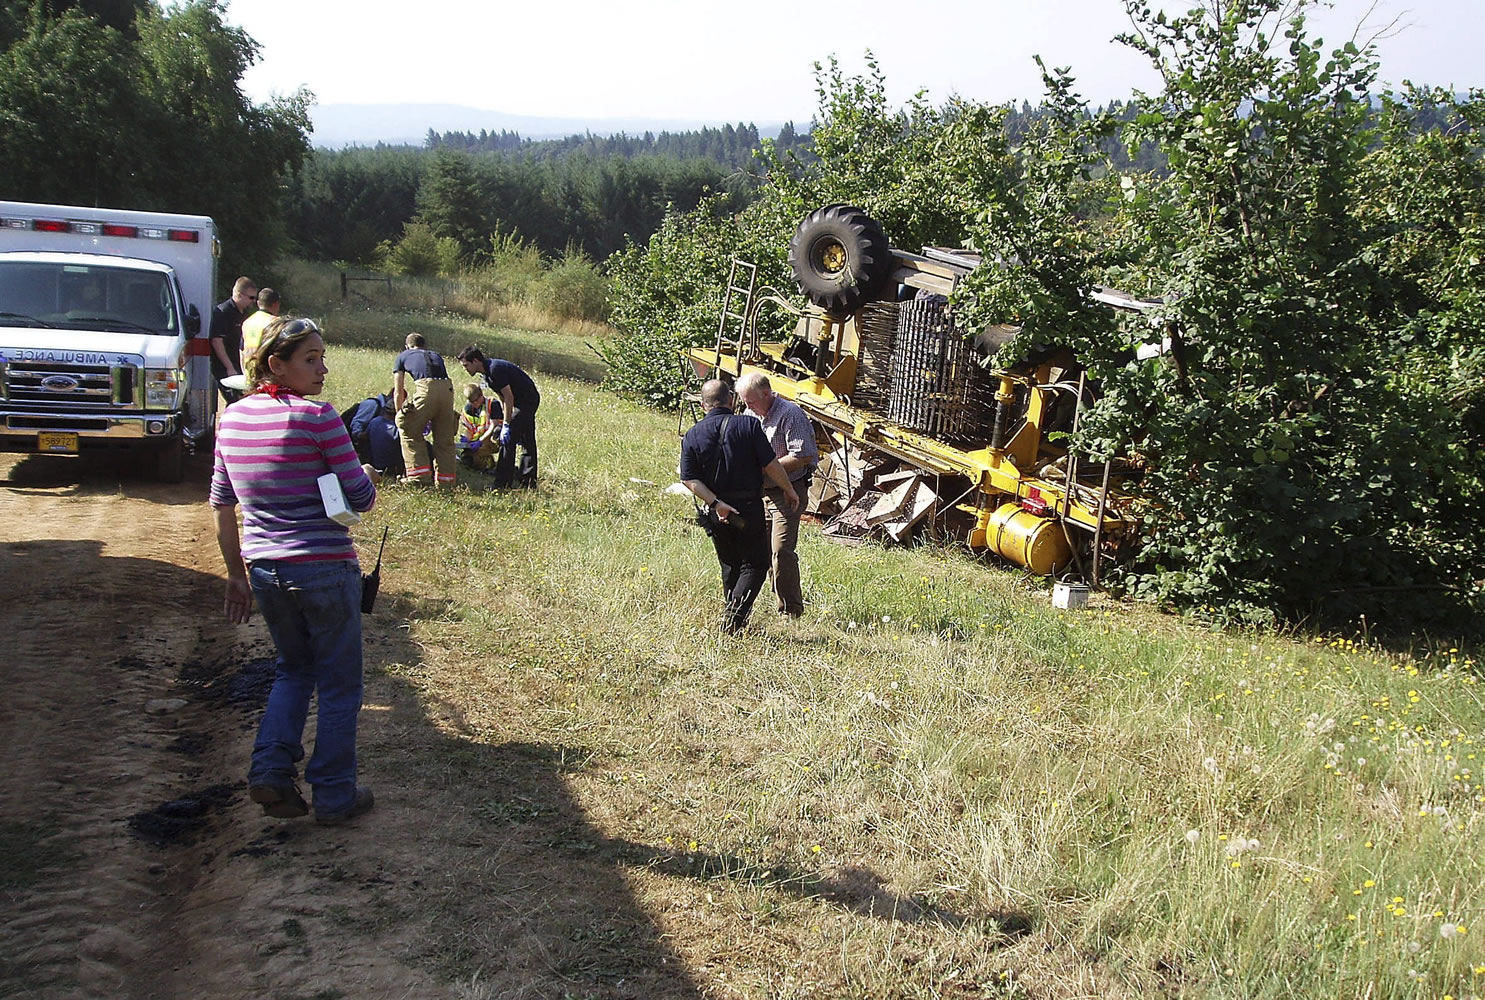 Clackamas County Sheriff's Office
Emergency crew officials work on the scene where a berry harvester flipped over at a farm near Sandy, Ore., on Monday. Two workers suffered broken legs and four others sustained minor injuries.